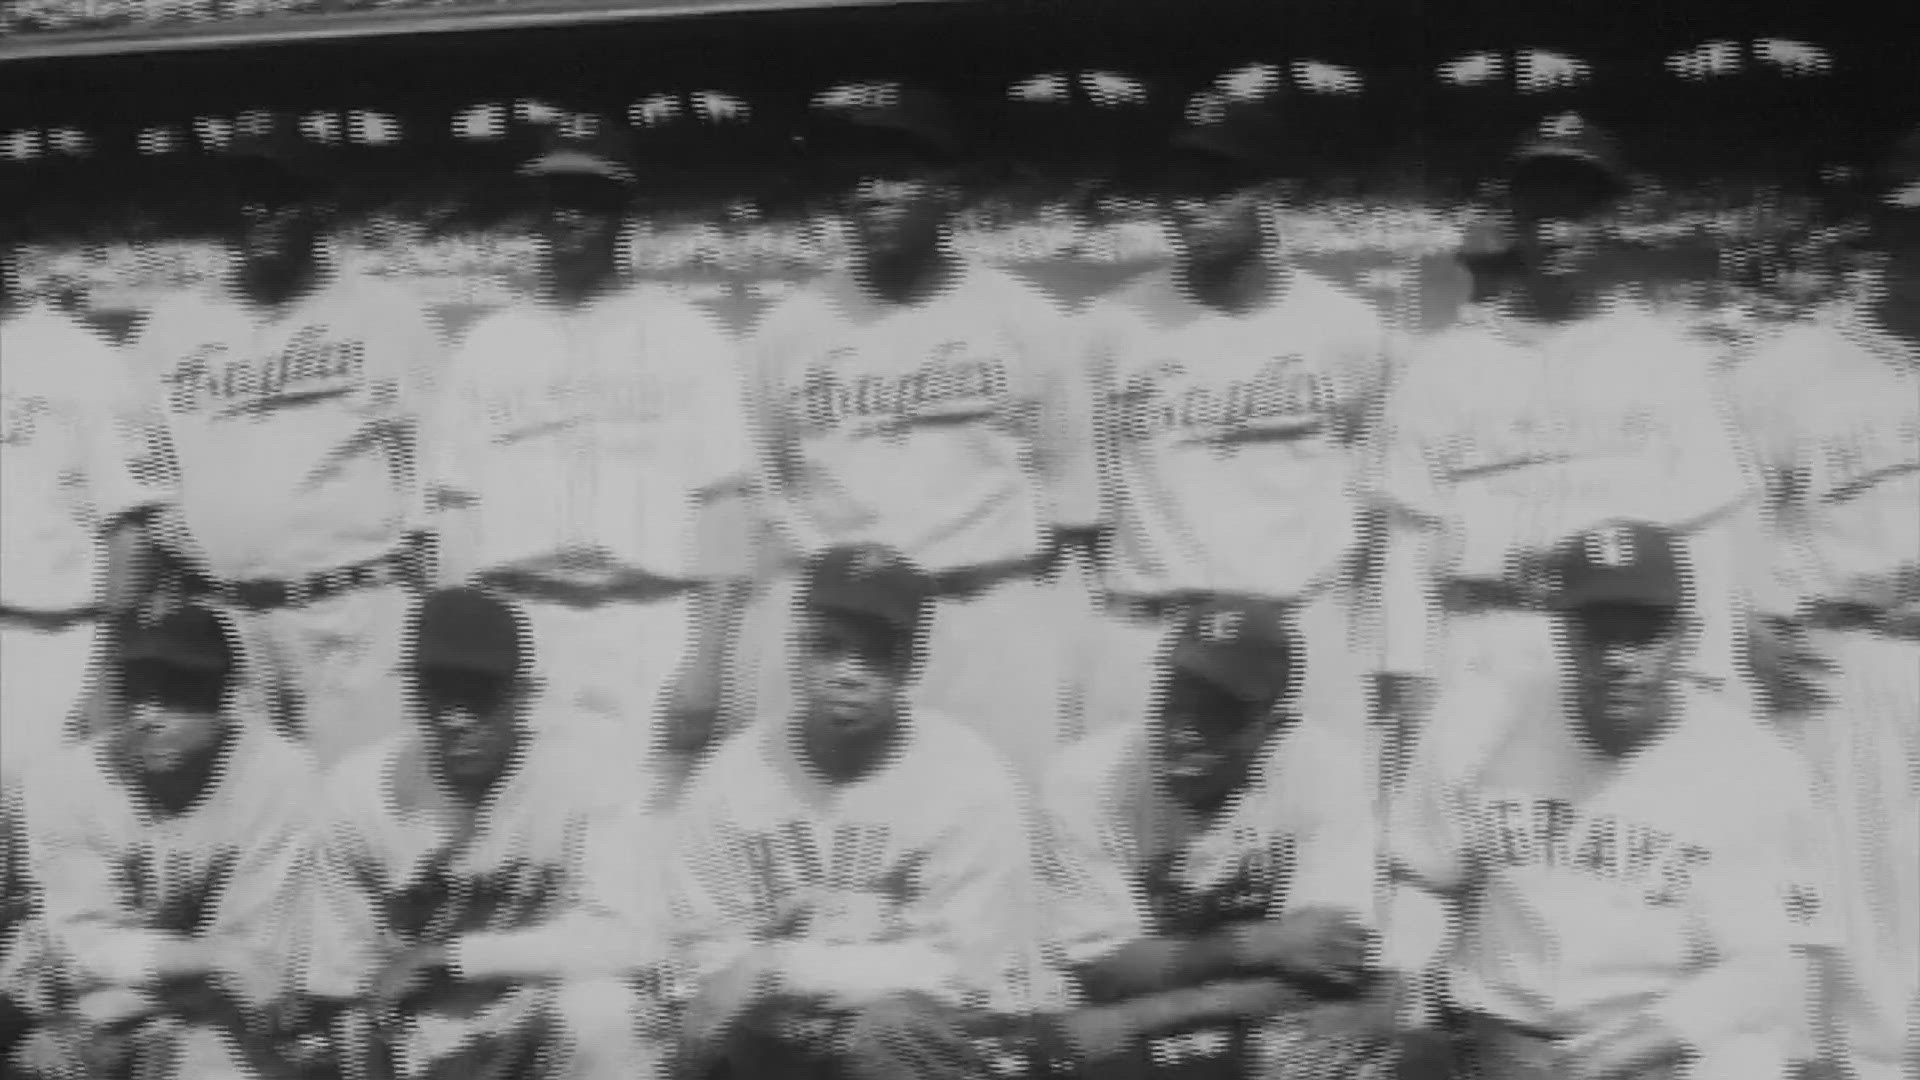 This statistics merger will add over 2,300 players who played in the Negro Leagues from 1920 to 1948. An updated baseball database will be published next month.